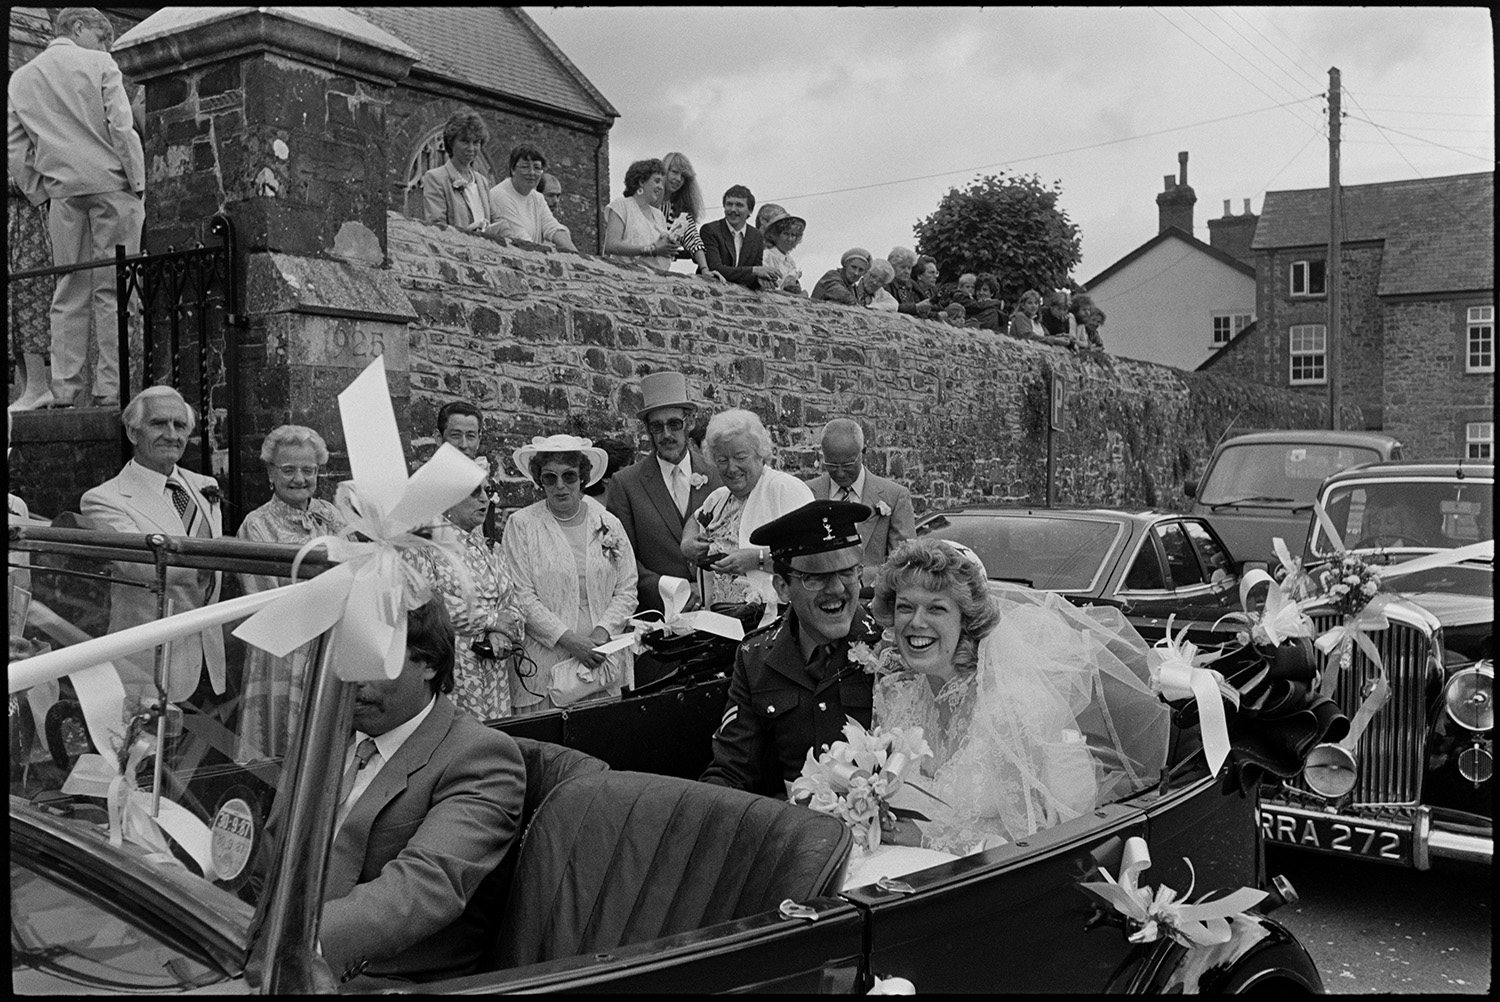 Onlookers at wedding, bride and groom arriving and leaving church in vintage car.
[A bride and groom, wearing a uniform, sitting in a vintage car after their wedding, with guests watching outside Chulmleigh Church.]